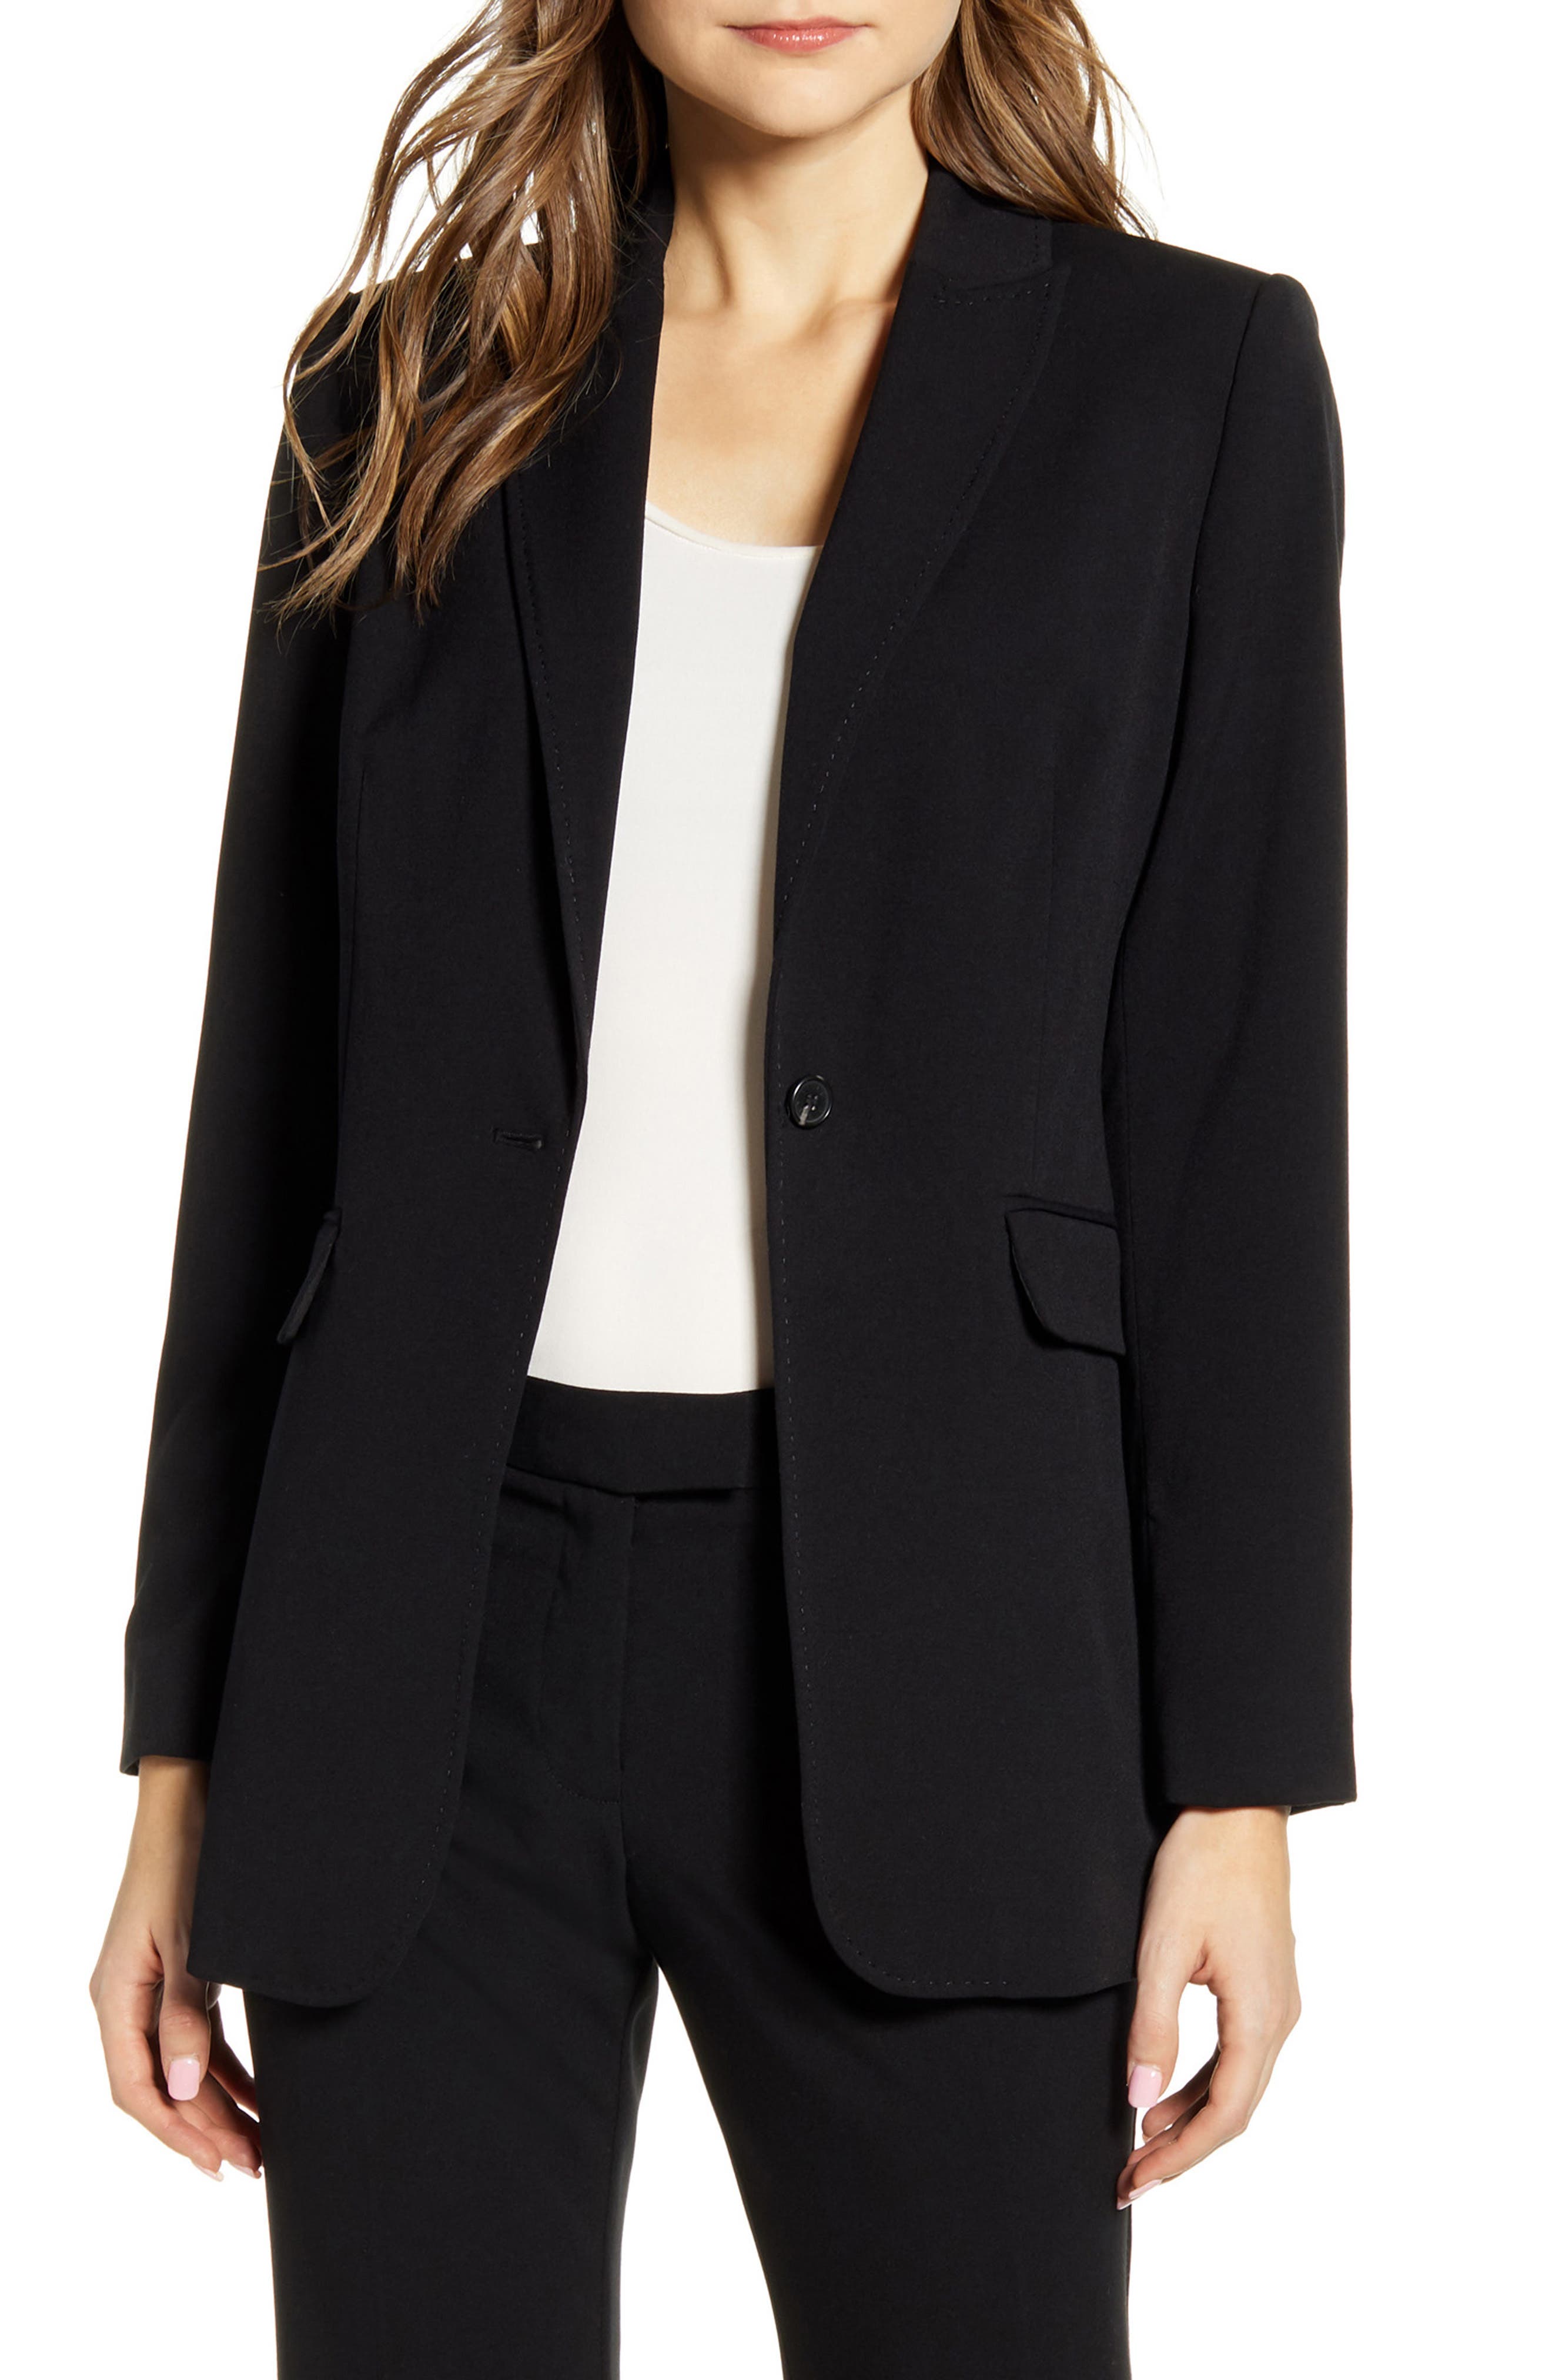 Blumarine Synthetic Suit Jacket in Black Womens Clothing Suits Skirt suits 